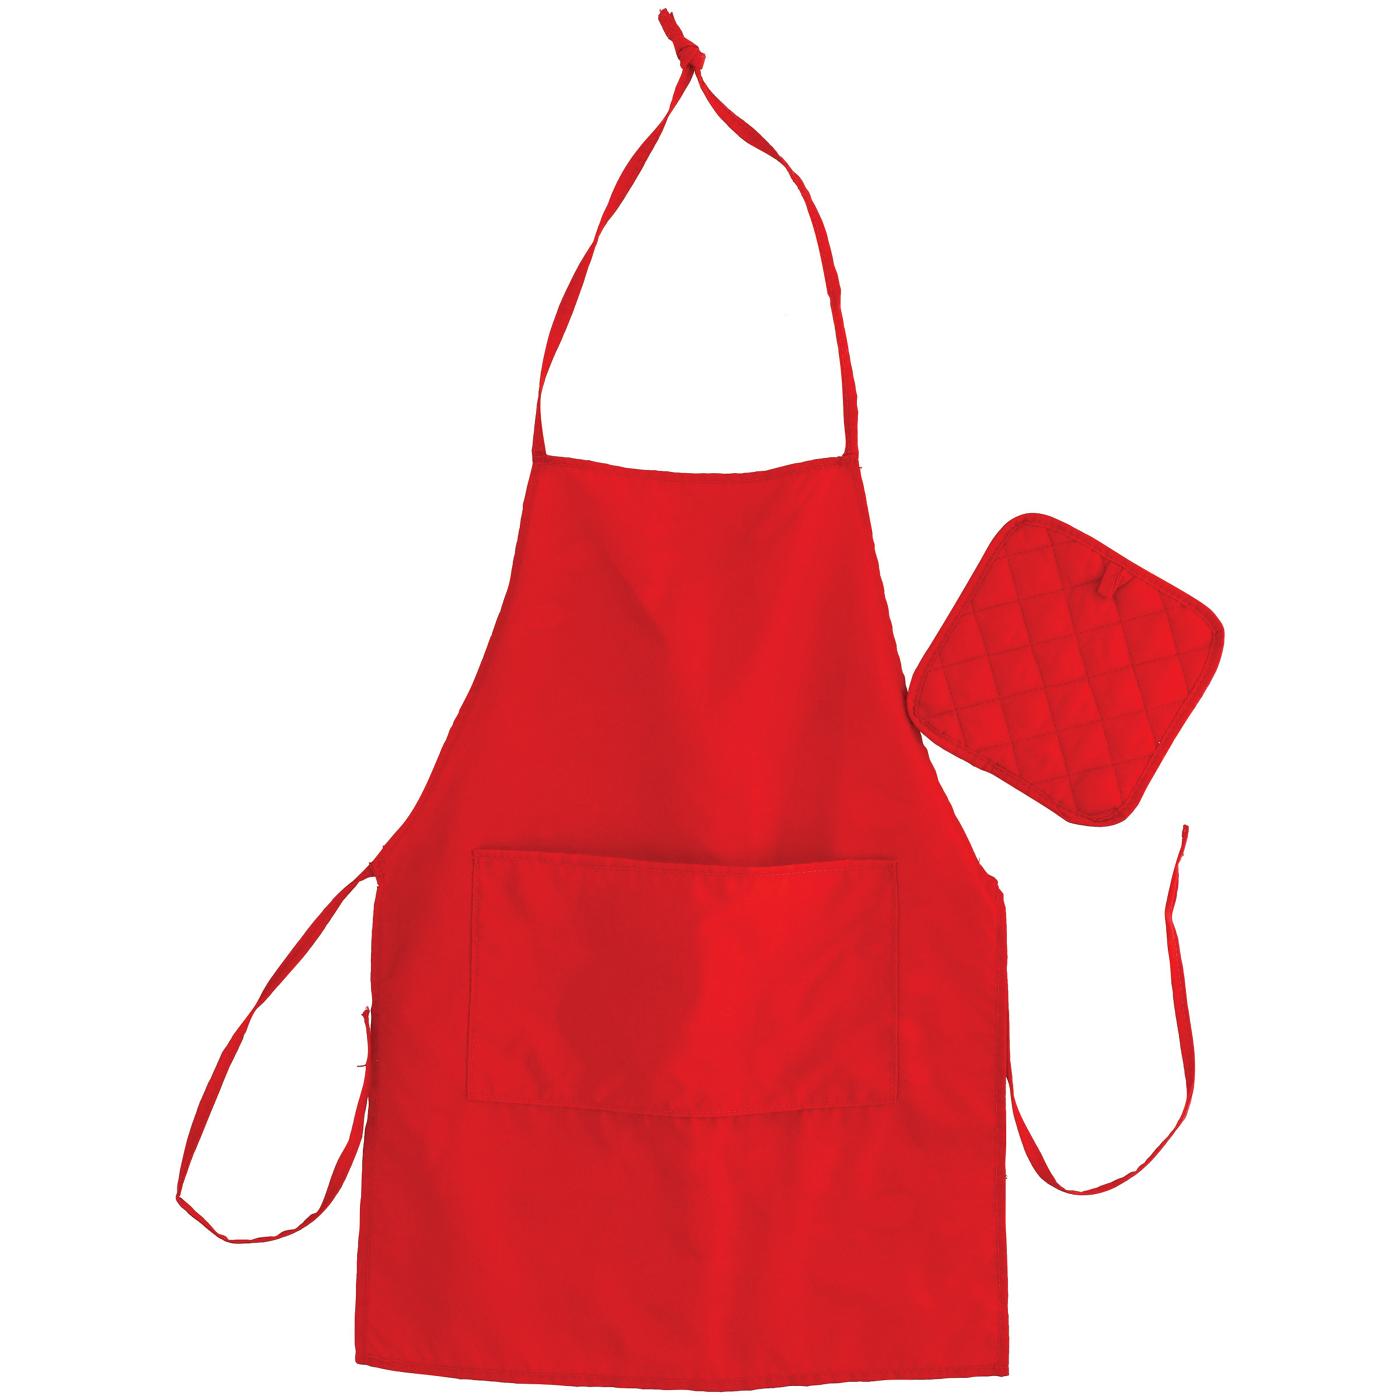 H-E-B Beyond Imagination Red Apron and Oven Mitt Set; image 1 of 2